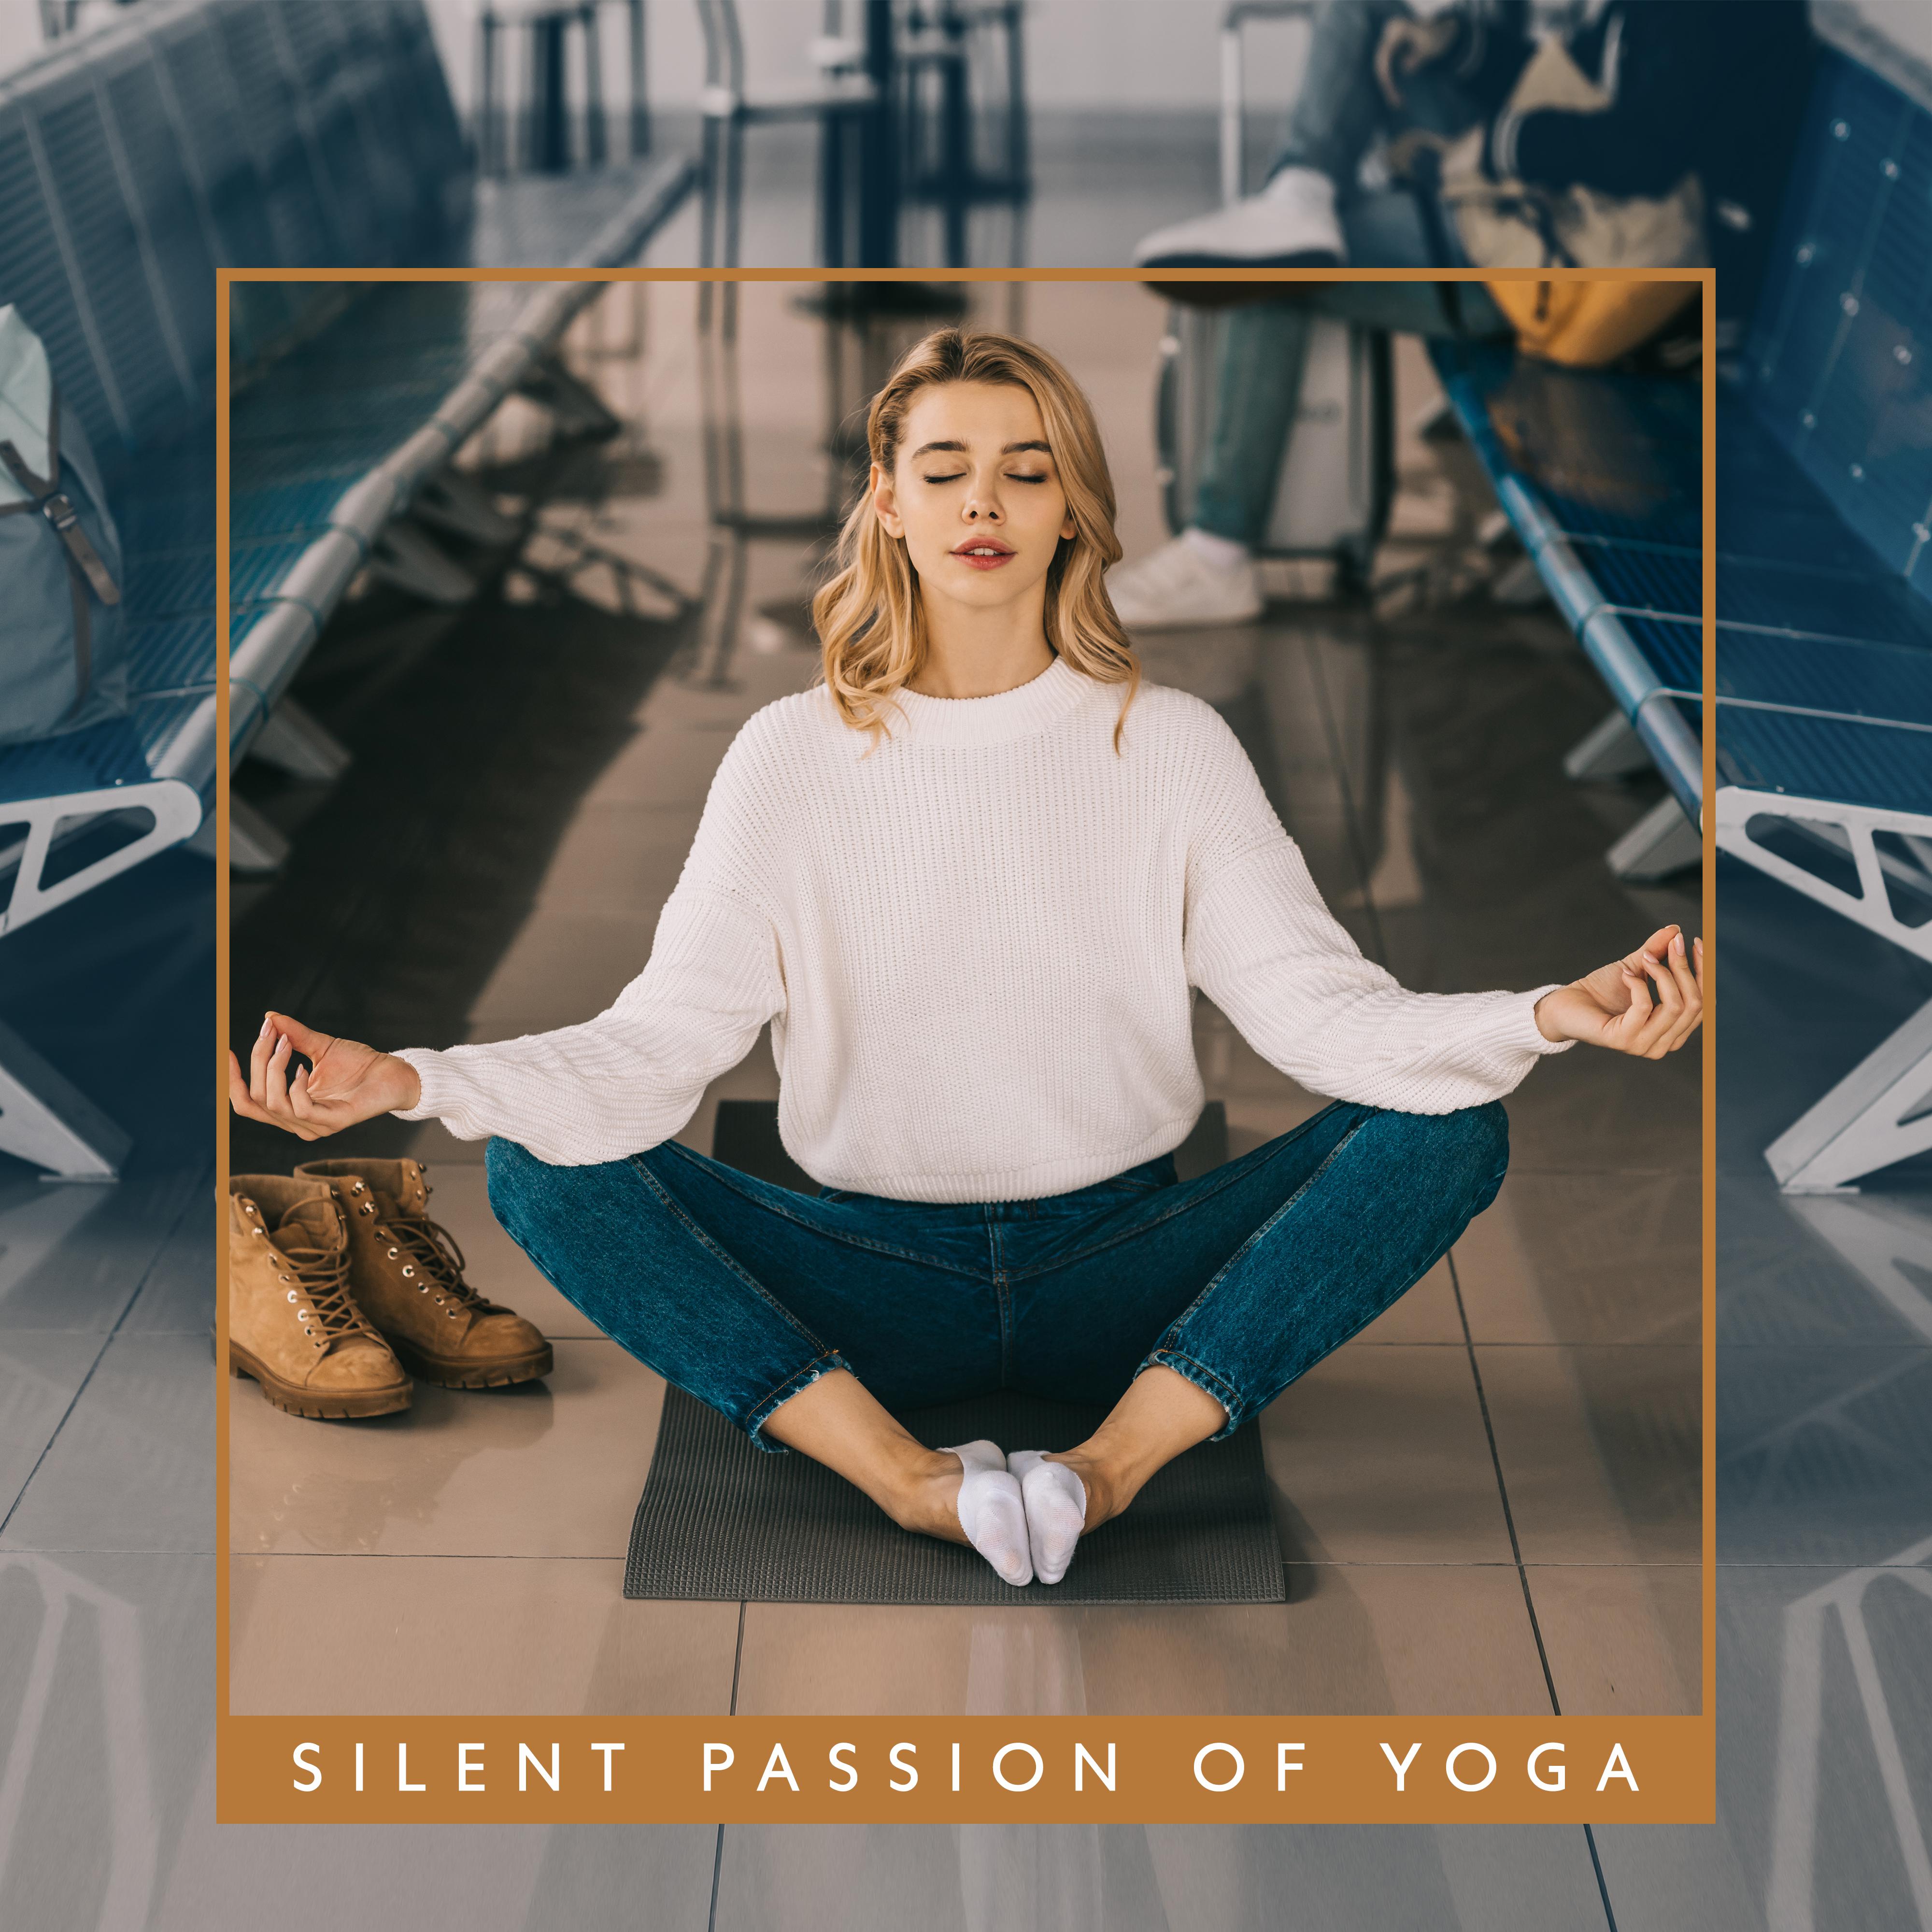 Silent Passion of Yoga: New Age 2019 Music Selection for Meditation Session & Deep Relaxation, Zen, Mantra Sounds, Body & Soul Connection, Chakra Balance